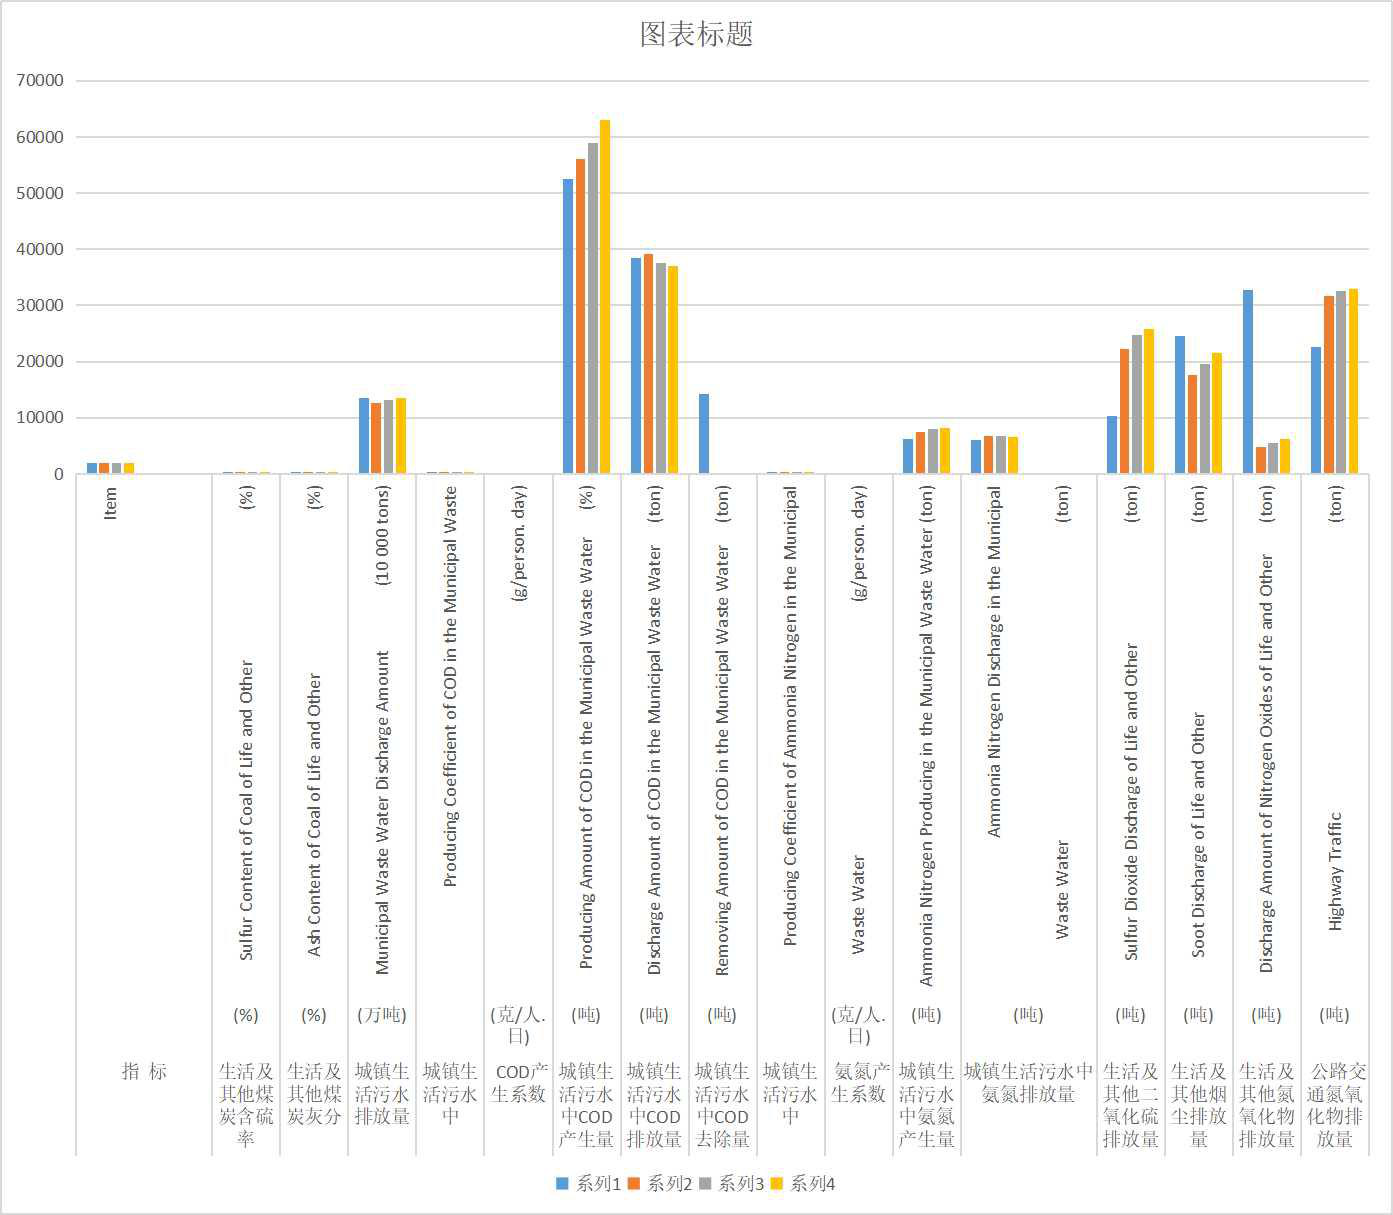 Urban living and other pollution in Qinghai Province (2002-2013)